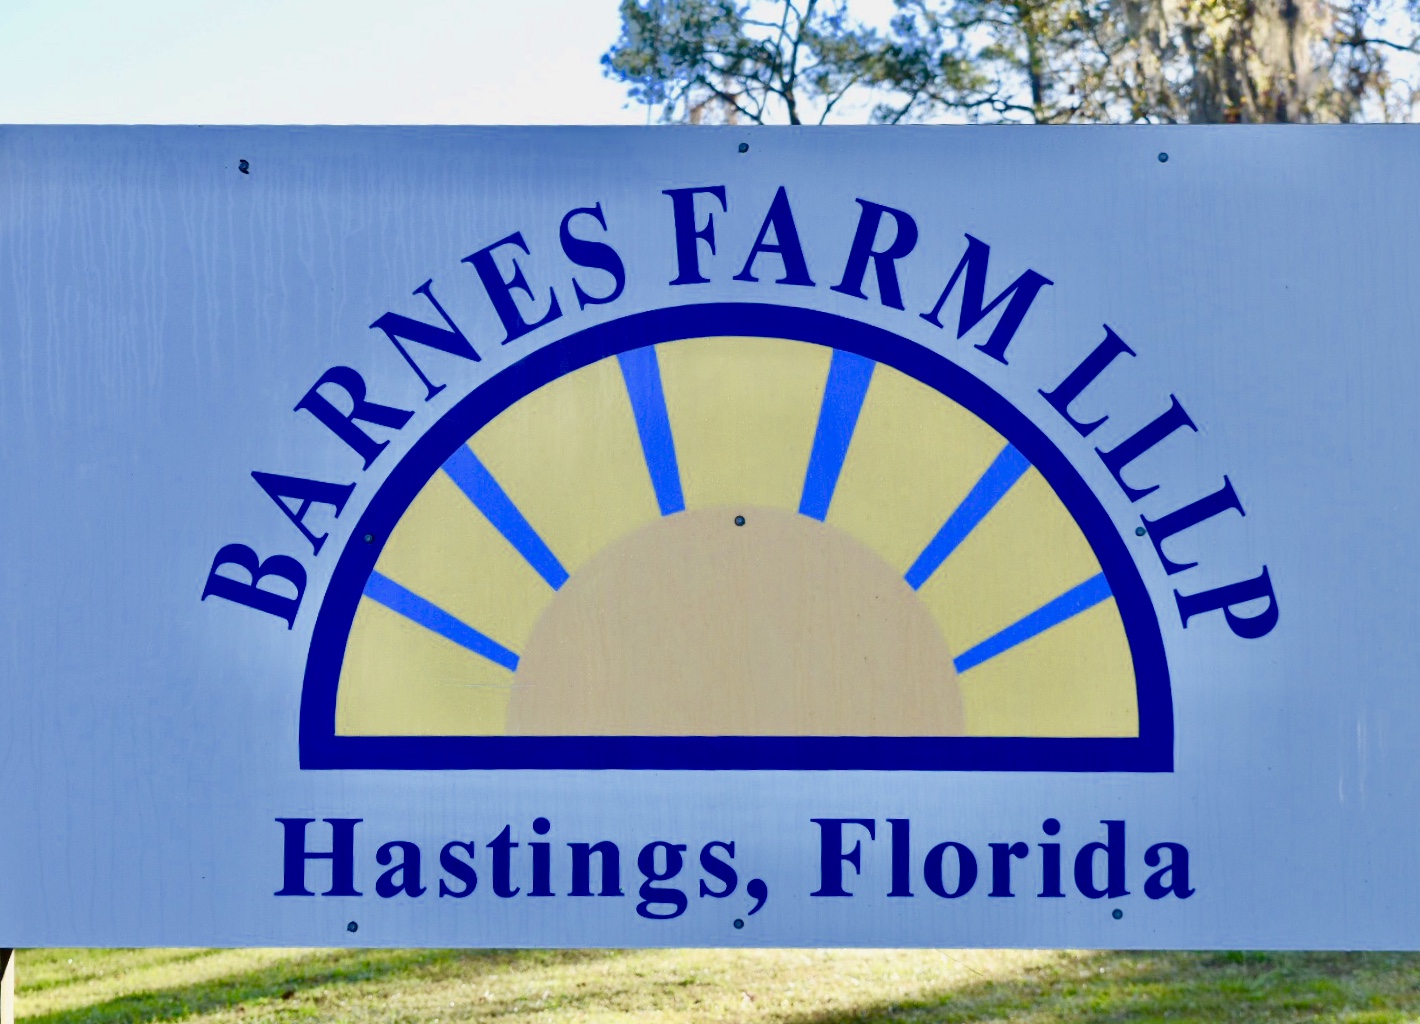  Barnes Farm in Hastings, Florida, has been in the Barnes family for five generations.&nbsp; 